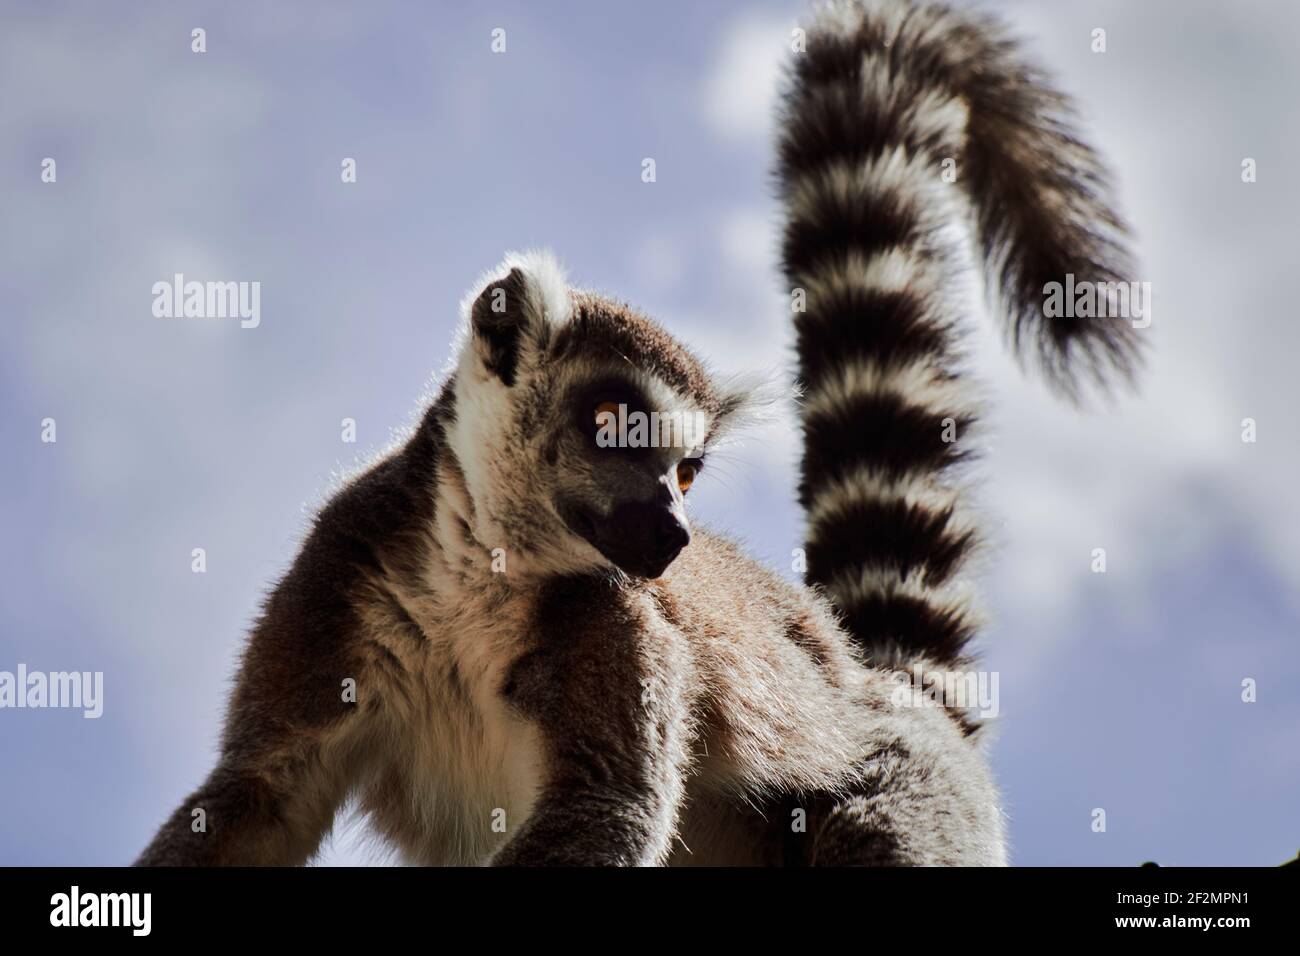 Single Ring-tailed lemur, Lemur catta sitting on tree branches against blue sky, close up, Stock Photo